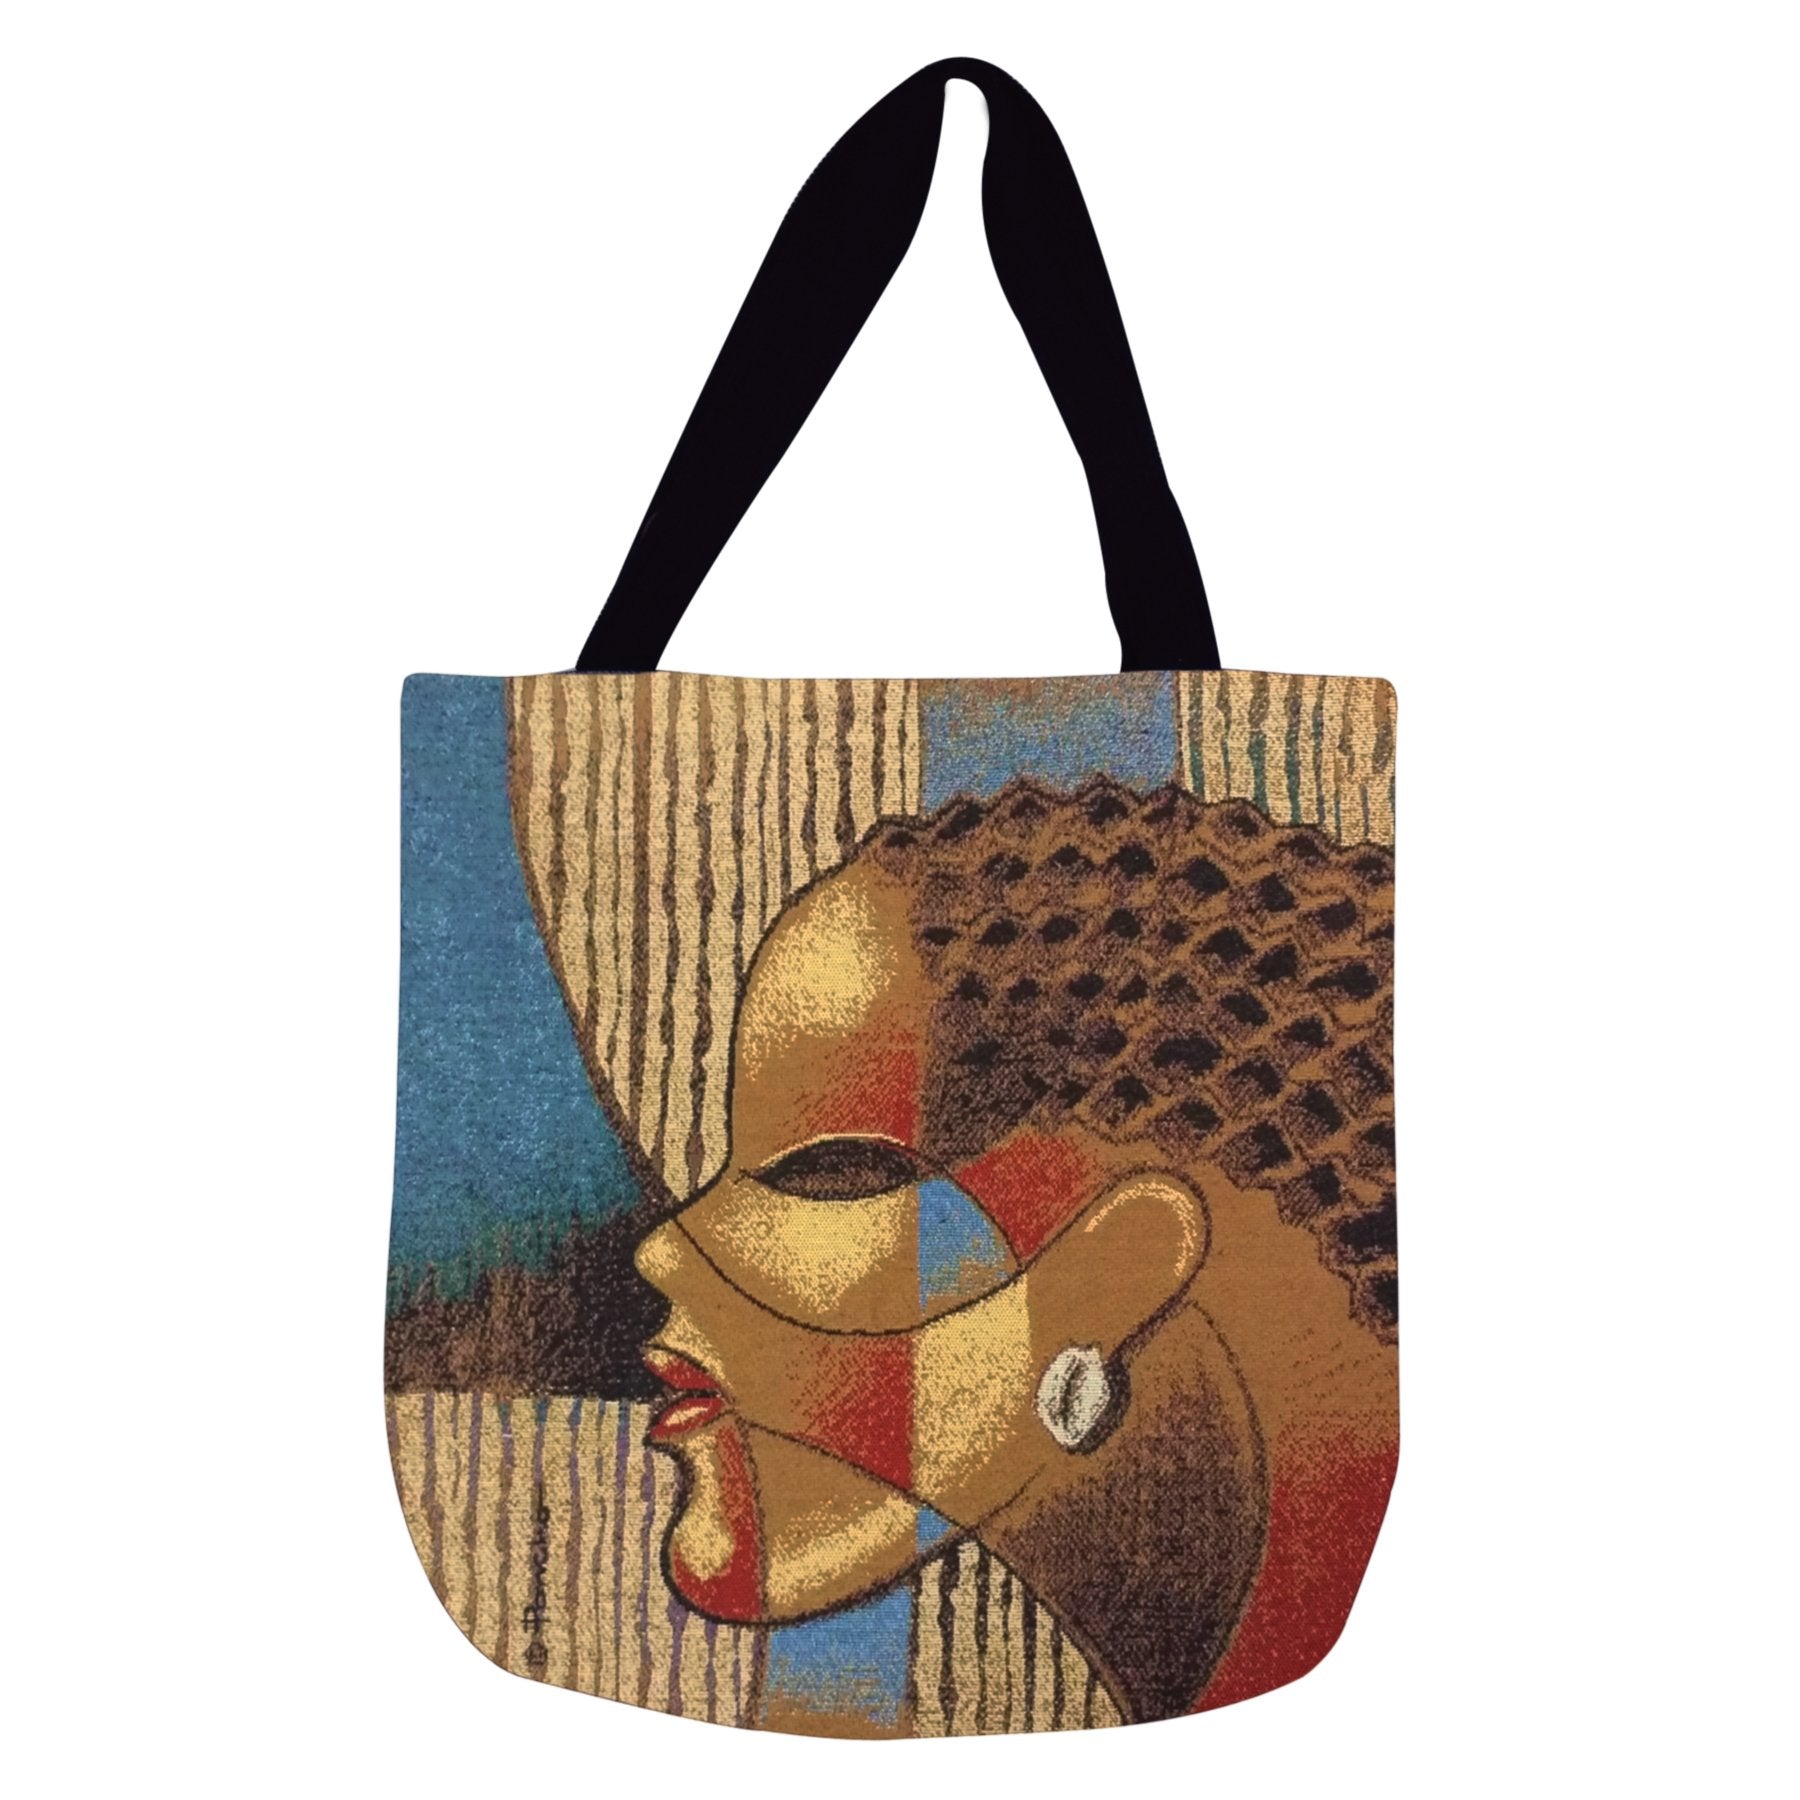 1 of 2: Composite of a Woman: African American Woven Tote Bag by Larry 